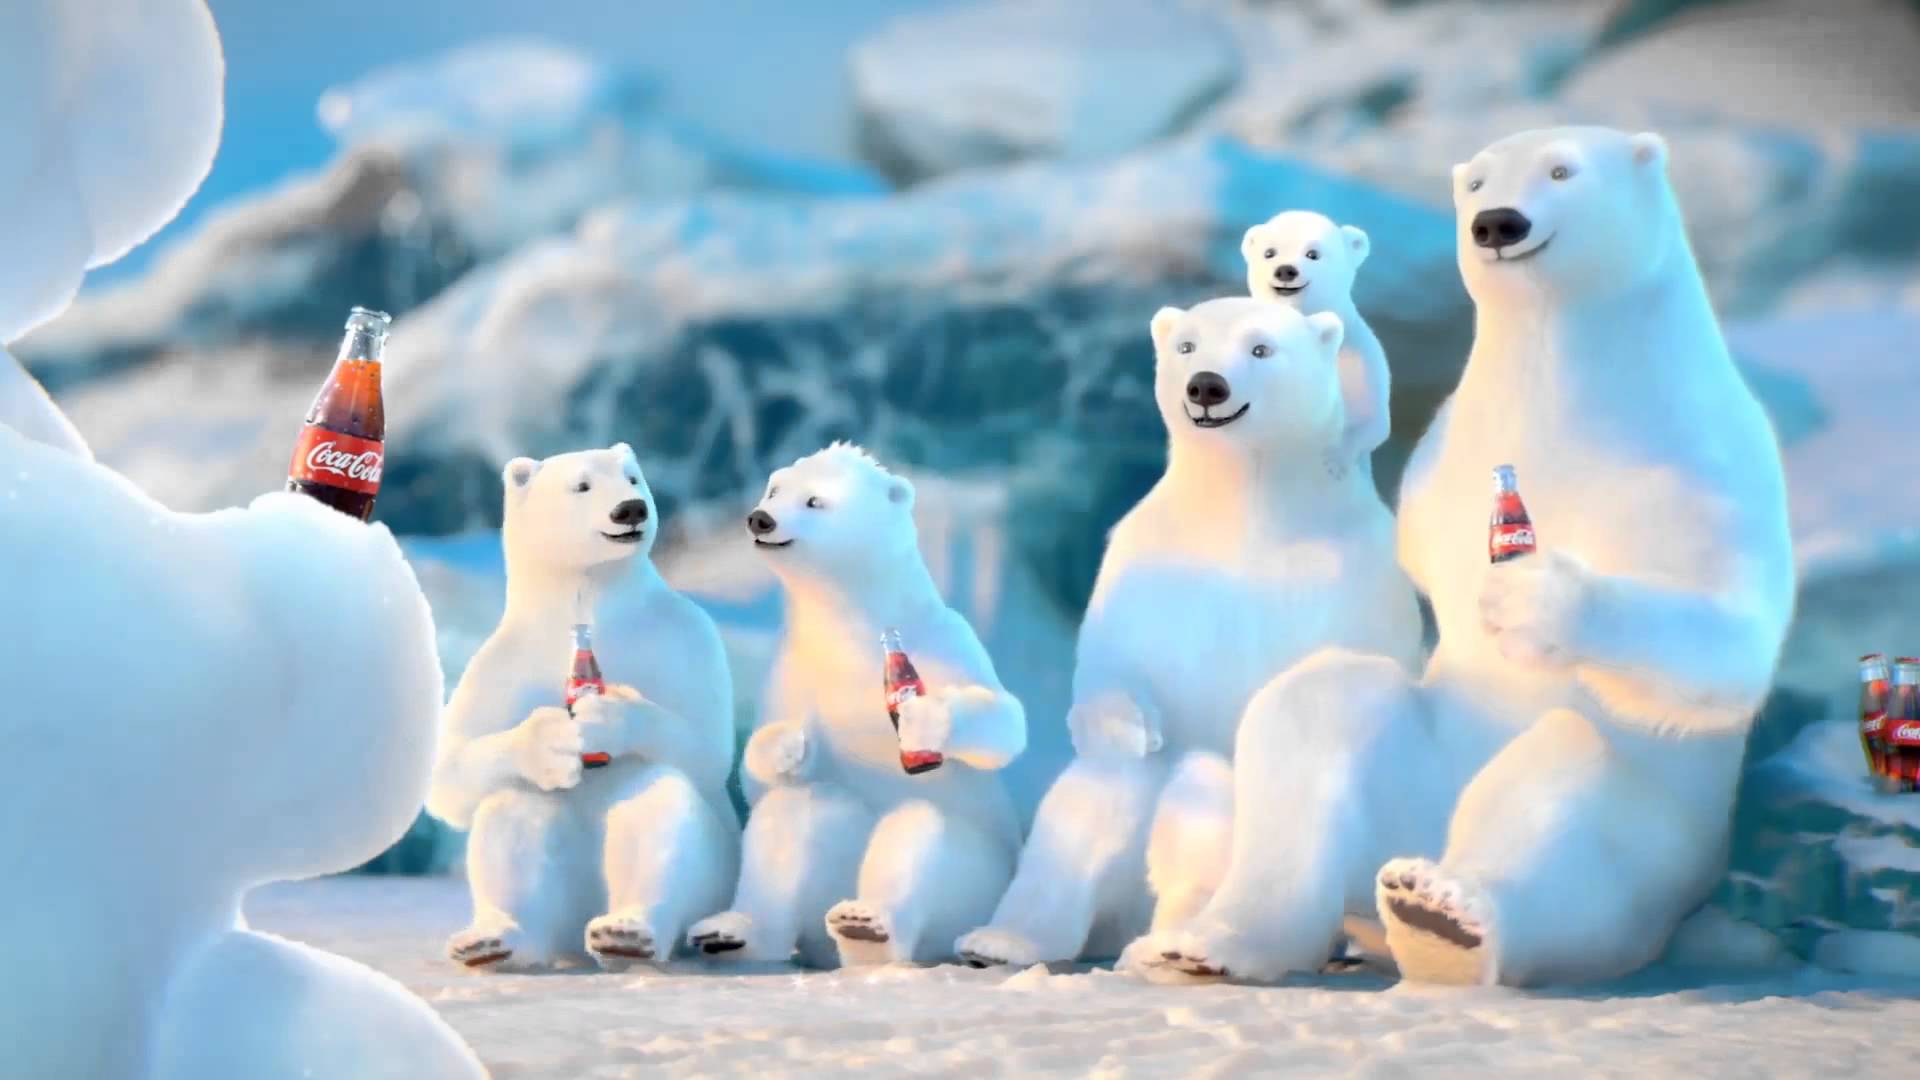 Free download Viewing Gallery For Coca Cola Christmas Polar Bears Wallpaper [1920x1080] for your Desktop, Mobile & Tablet. Explore Christmas Polar Bear Wallpaper. Polar Bear Desktop Wallpaper